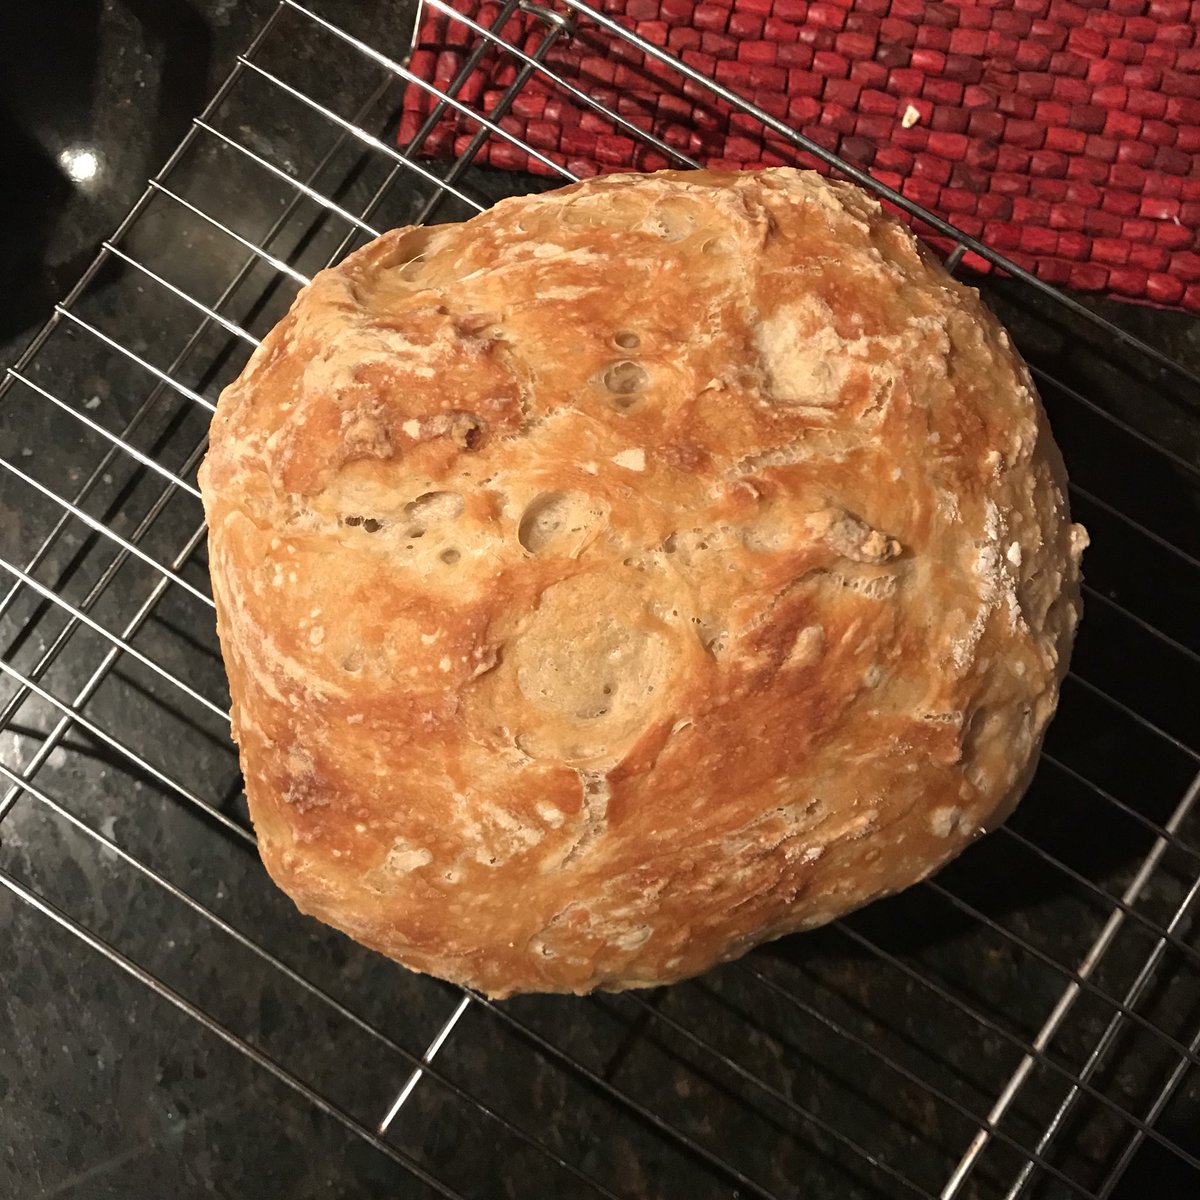 Bread #4: Almost No-Knead Bread. So, the idea of this bread is supposed to be that you can make an artisan-style loaf very easily. The catch is it takes forever. Very little active time but looonnnng rise. You also need a Dutch oven.